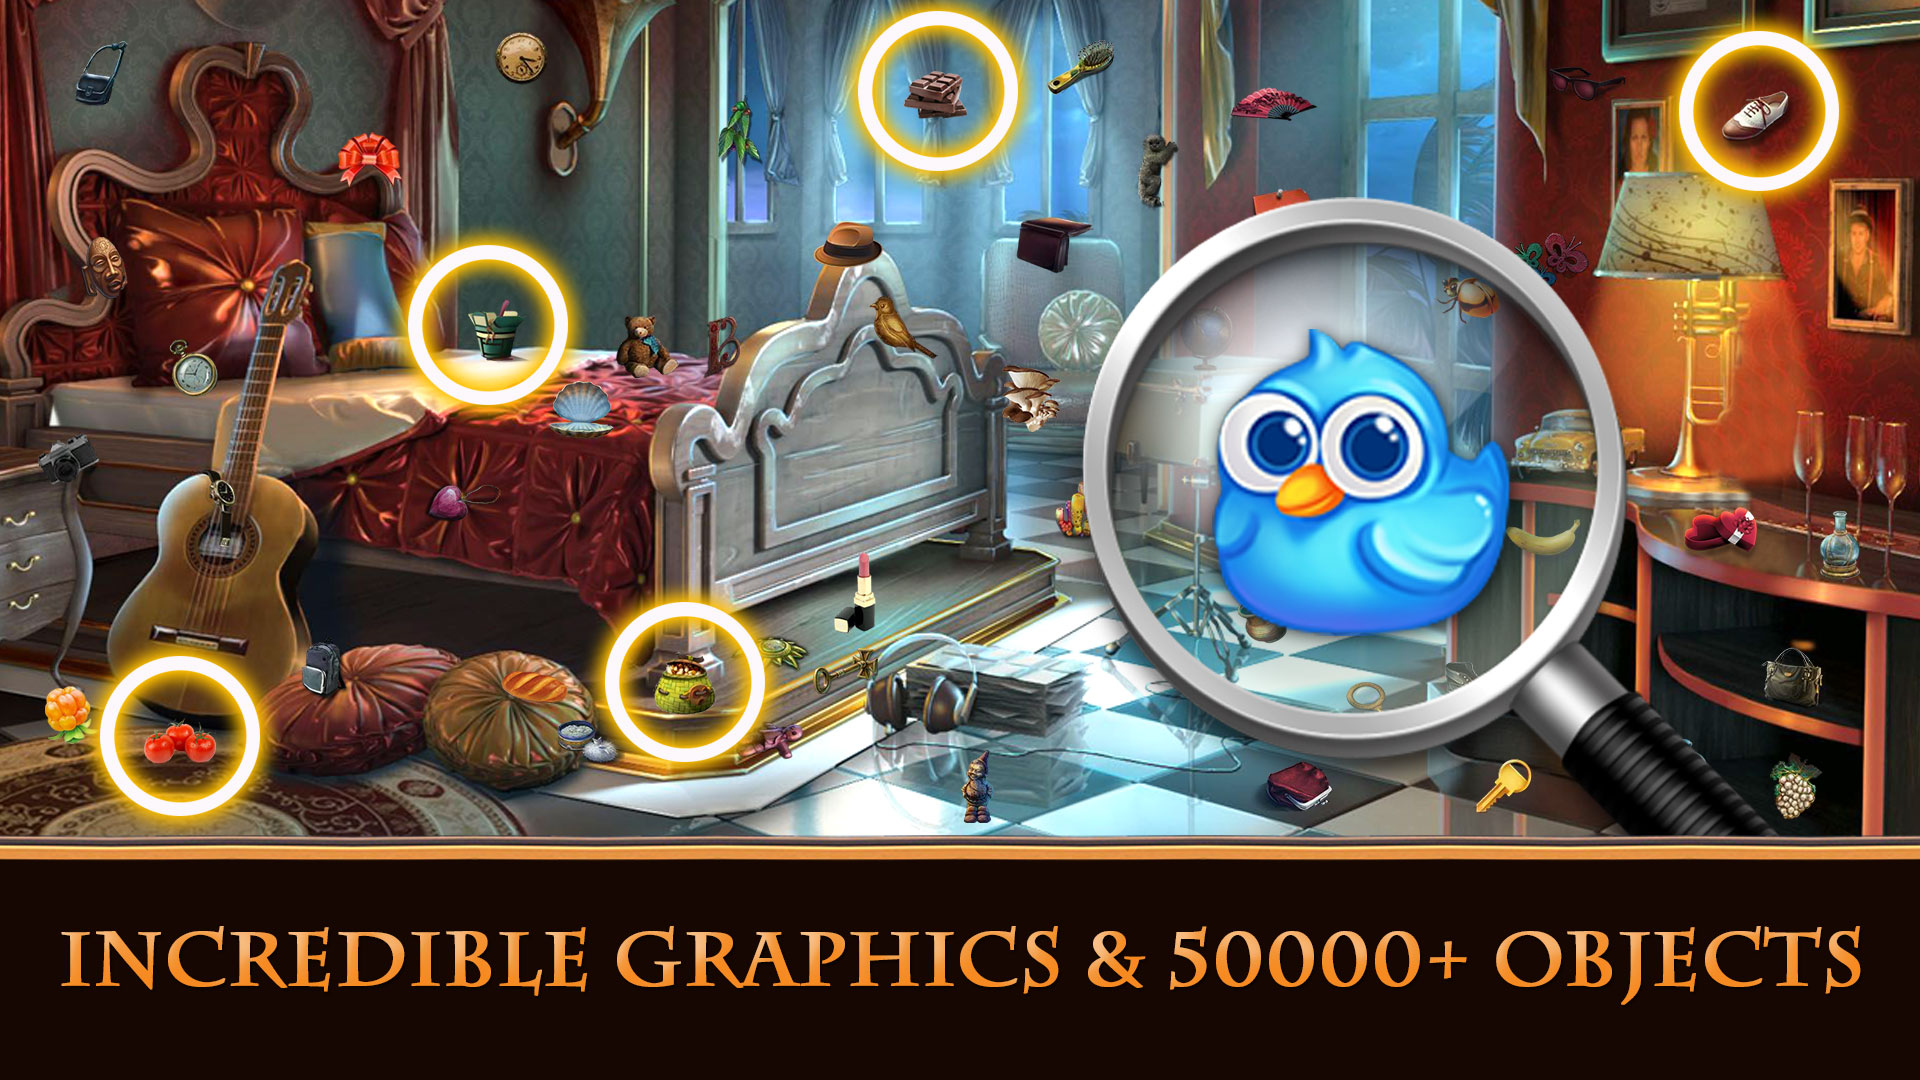 Hidden Object Game Free : Rituals Of Night